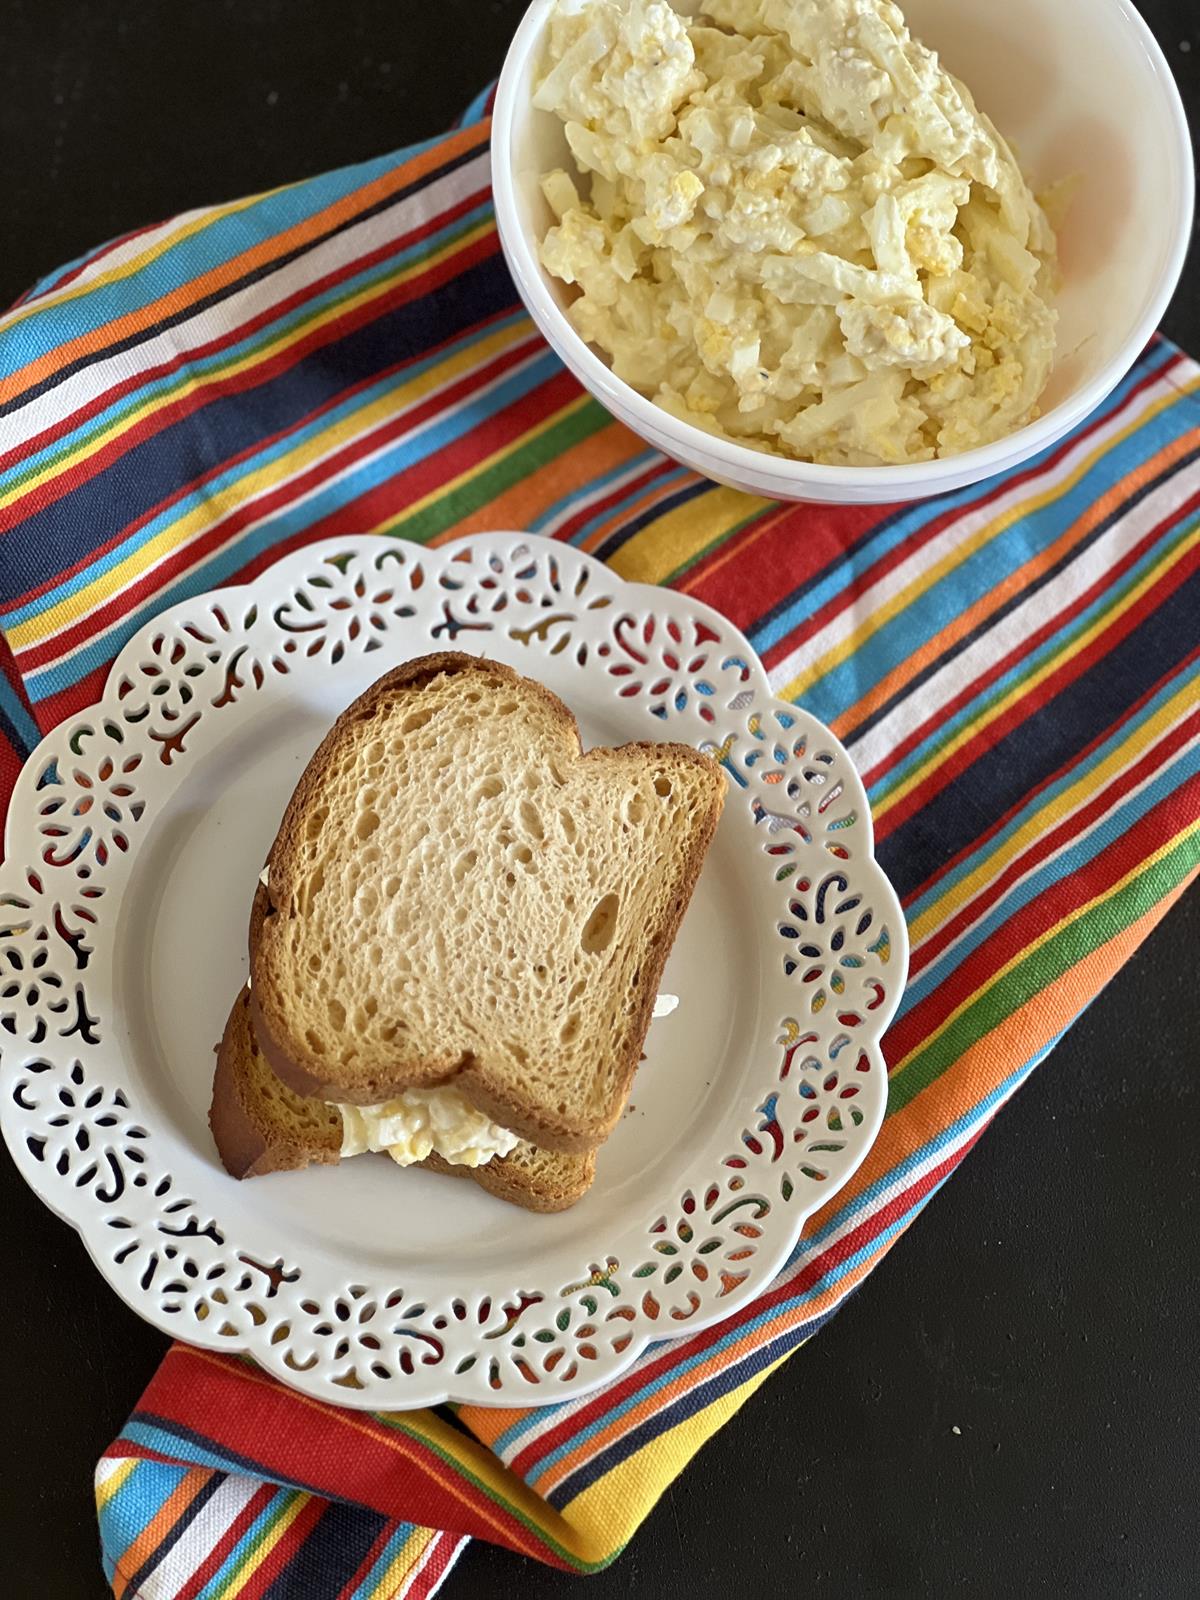 egg salad sandwich on white plate with bowl of egg salad on a striped napkin